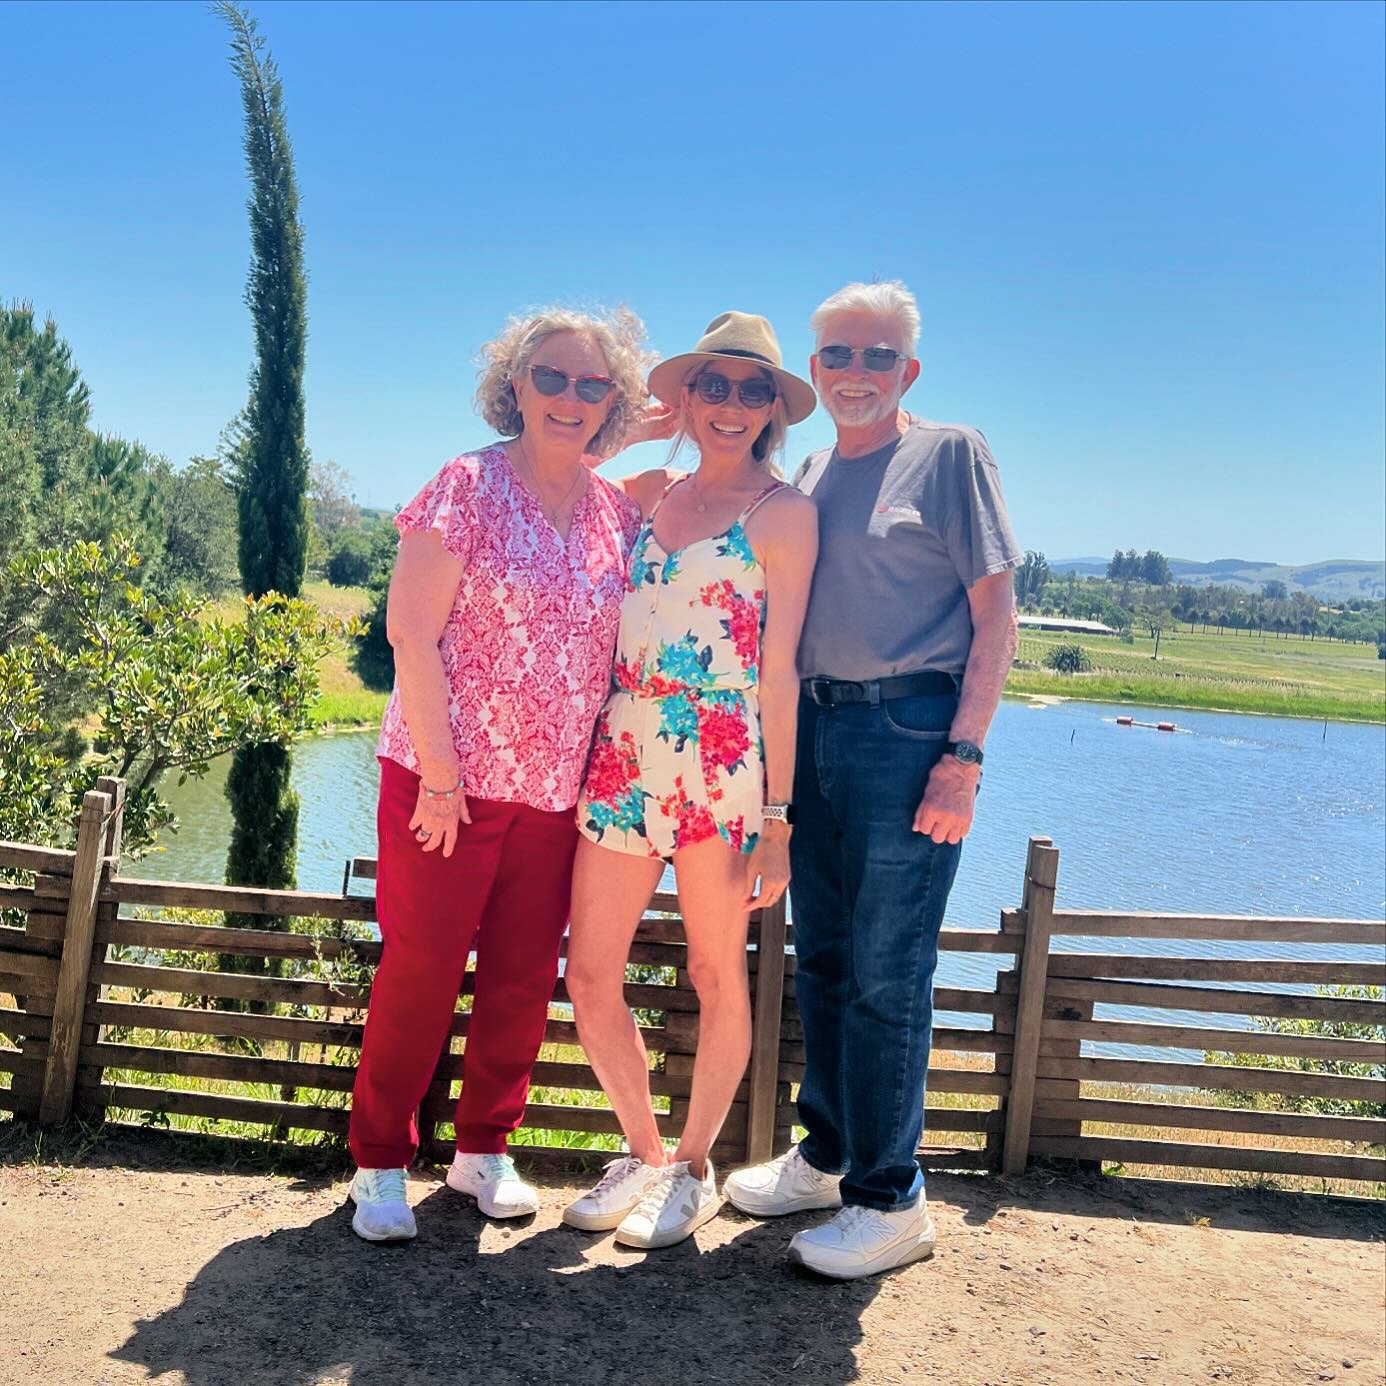 My parents have been traveling to see me in California for 24 years now! That&rsquo;s wild to me. The hollywood years of visiting me on set, hanging at the beaches, sitting in oodles of traffic, and so many dinners with wonderful friends&hellip; and 